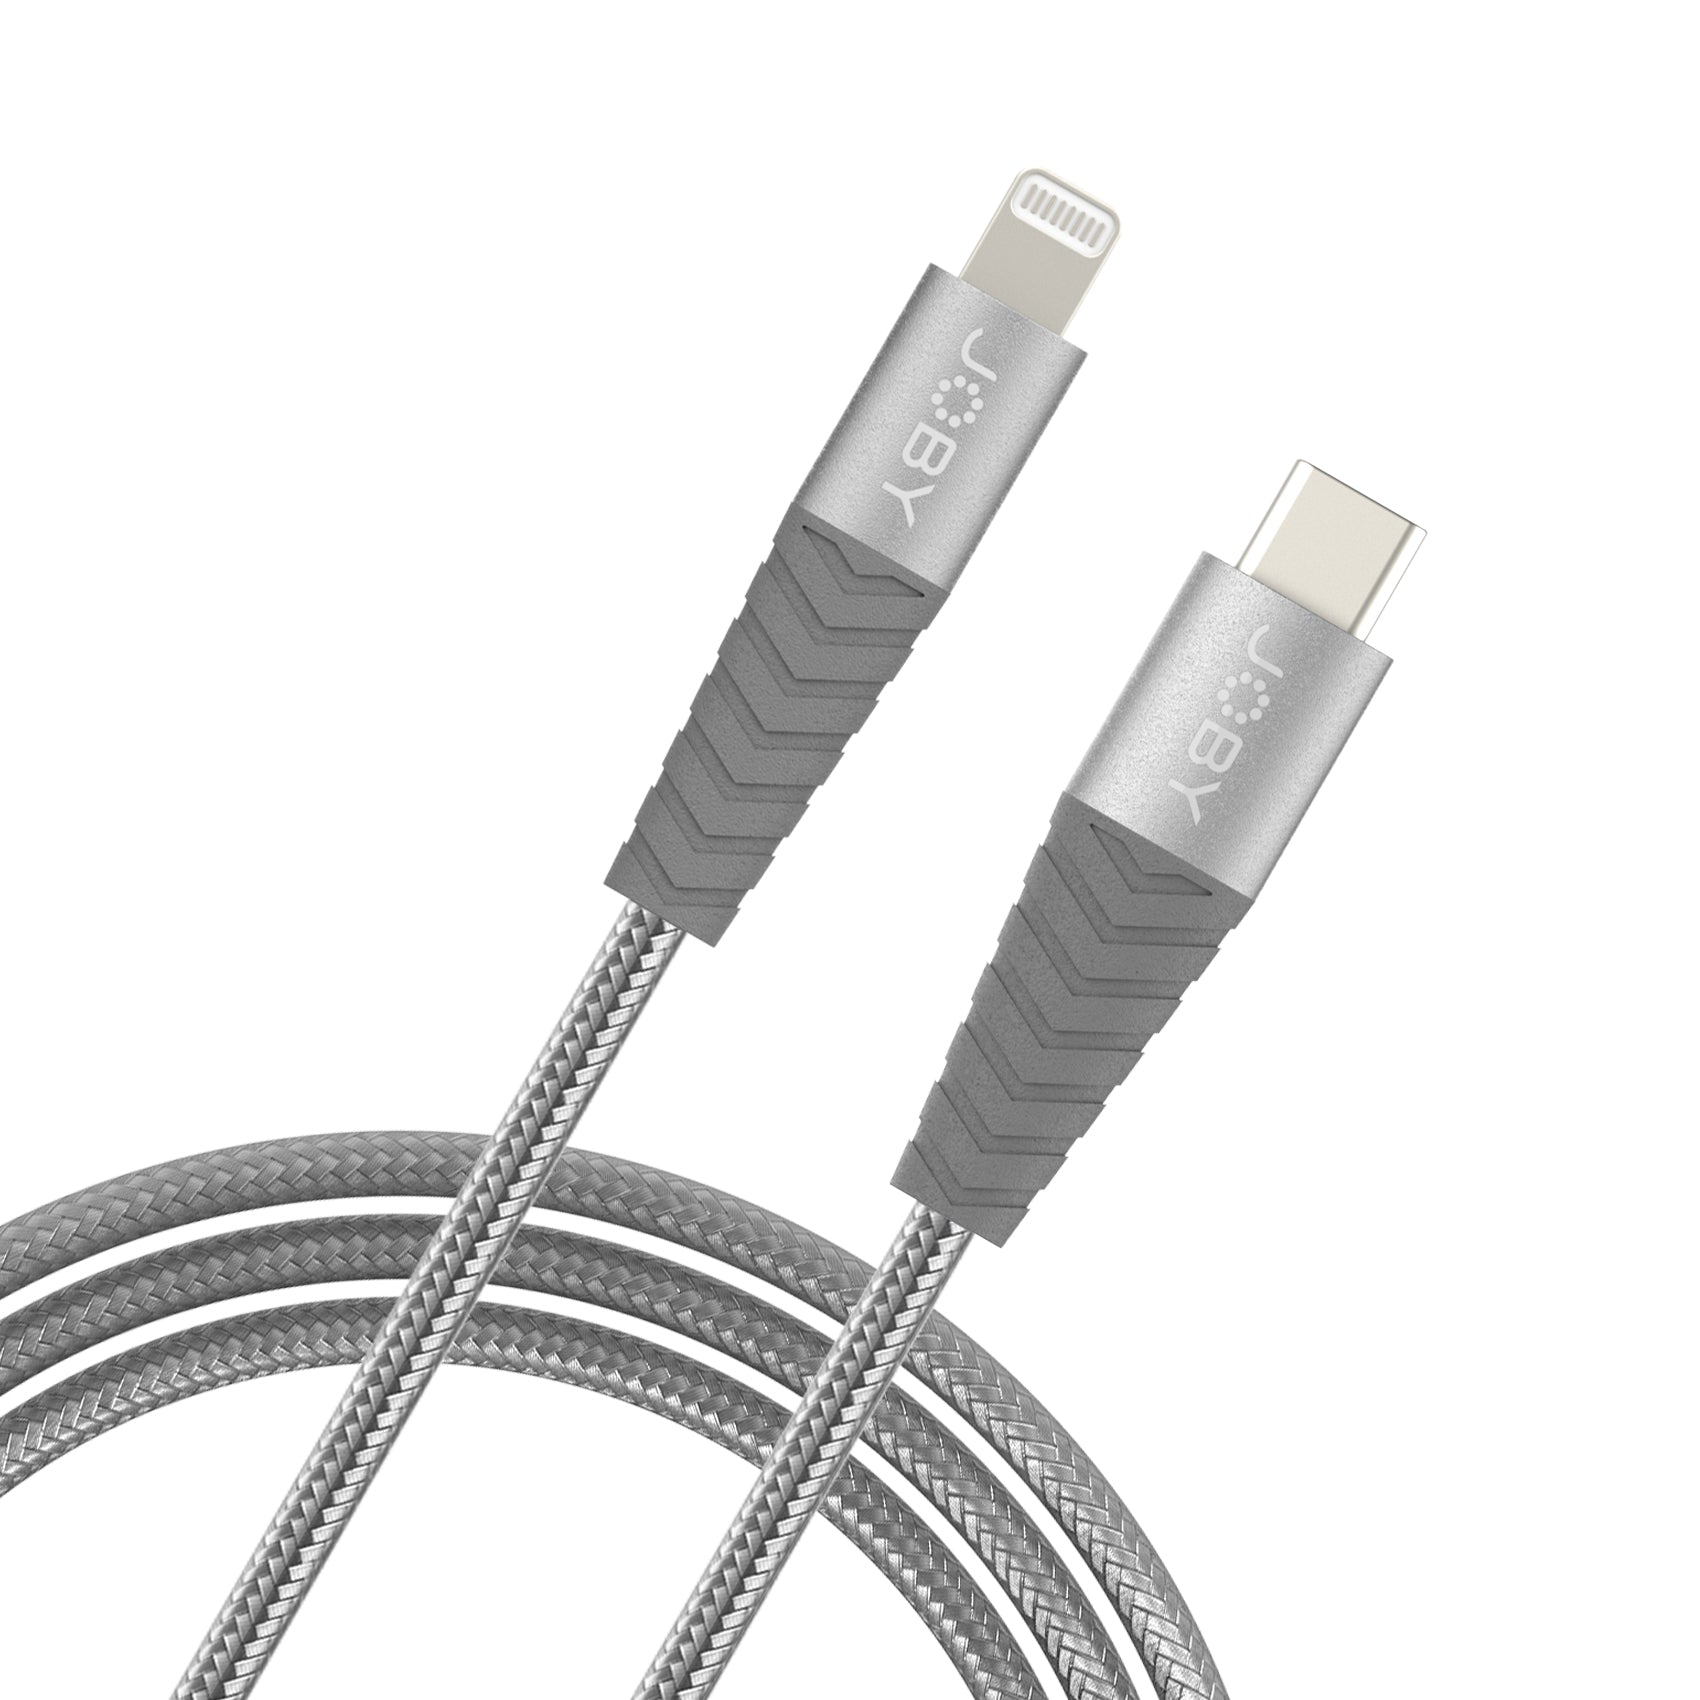 Joby USB-C to Lightning Cable - Space Grey -  - 2m/6ft